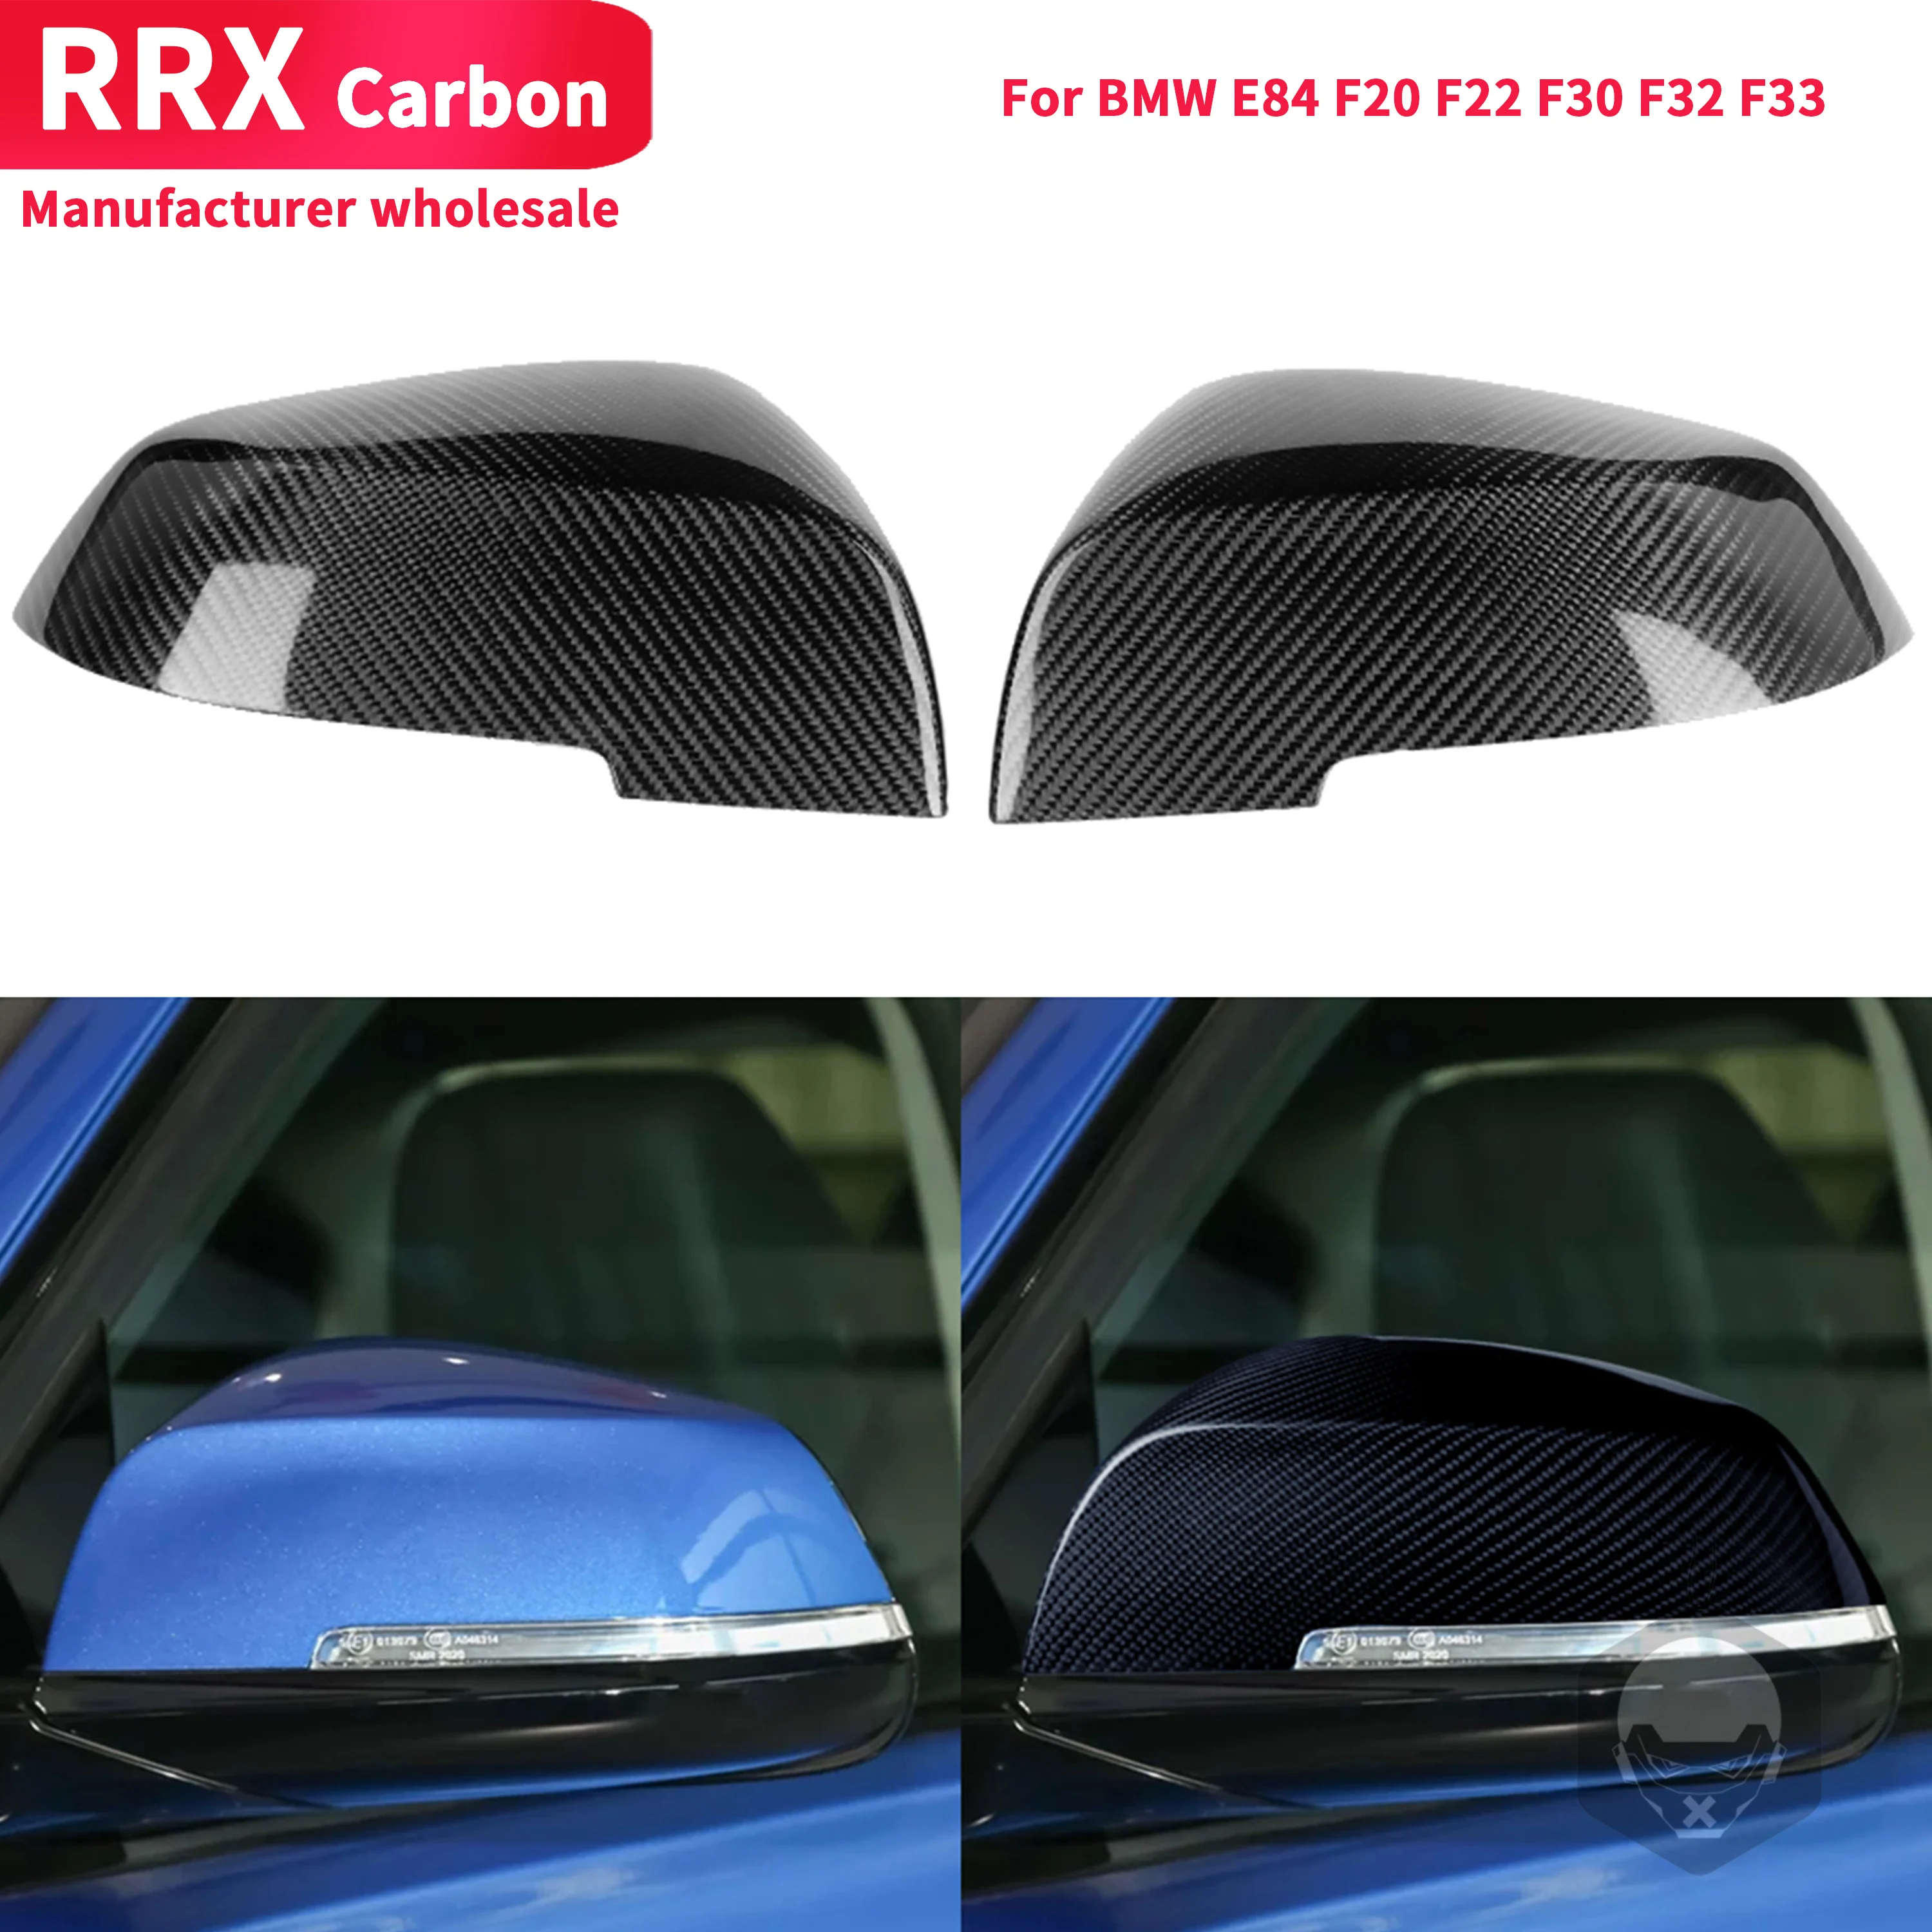 

Replacement Carbon Fiber Side Wing Shells For BMW E84 F20 F22 F30 F32 F33 Rearview Mirror Cover Caps Trim Kit Accessories Black